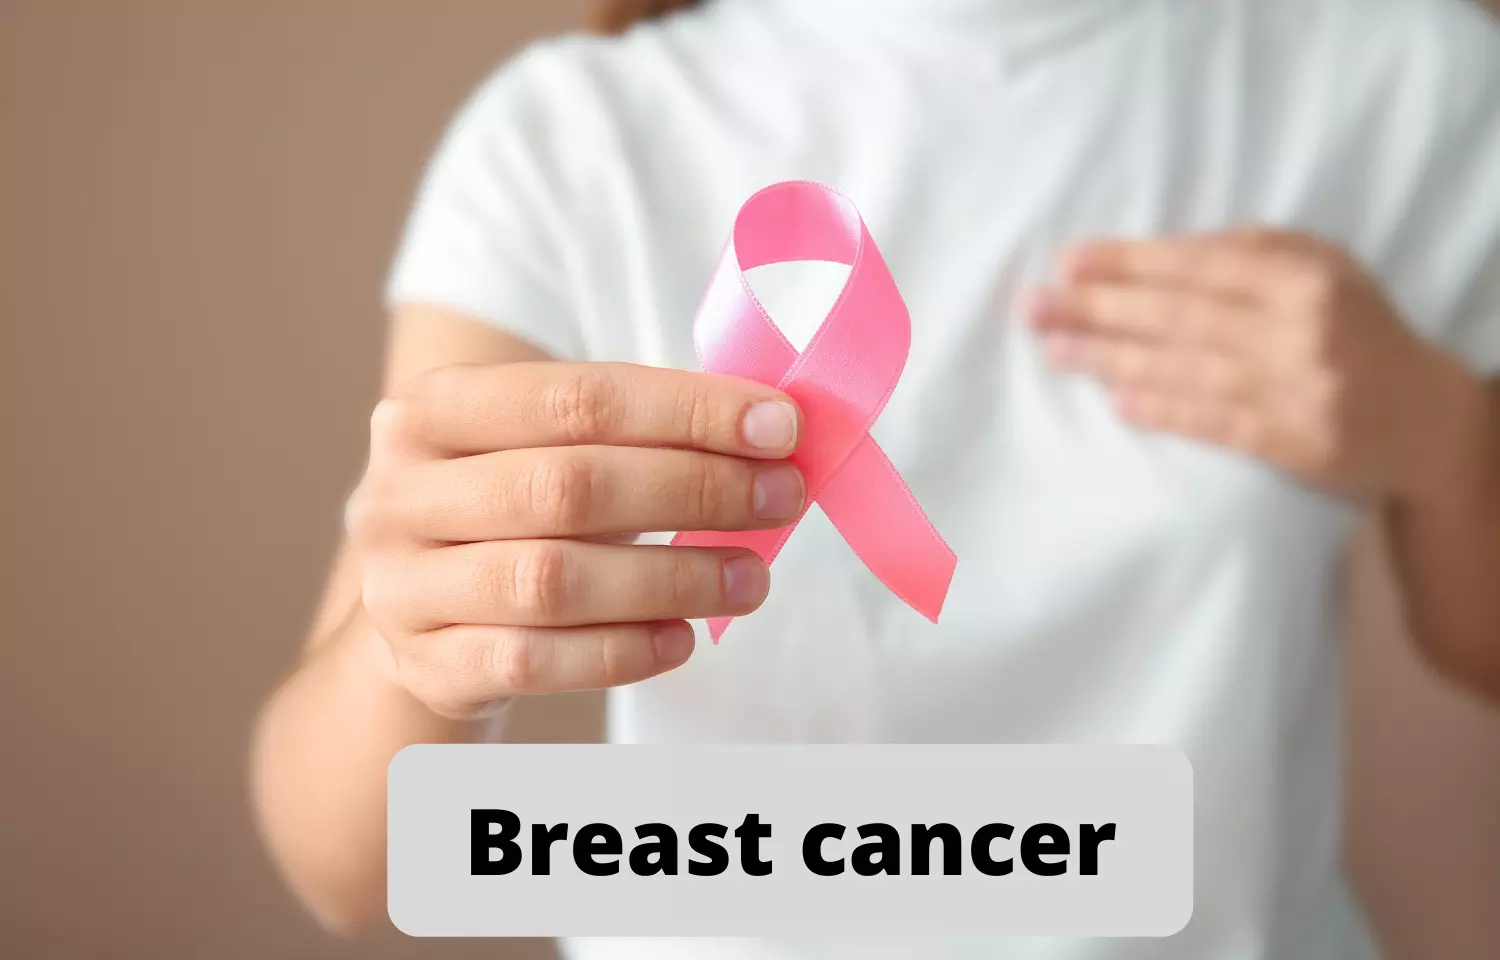 Study tests link between calcium channel blockers and breast cancer